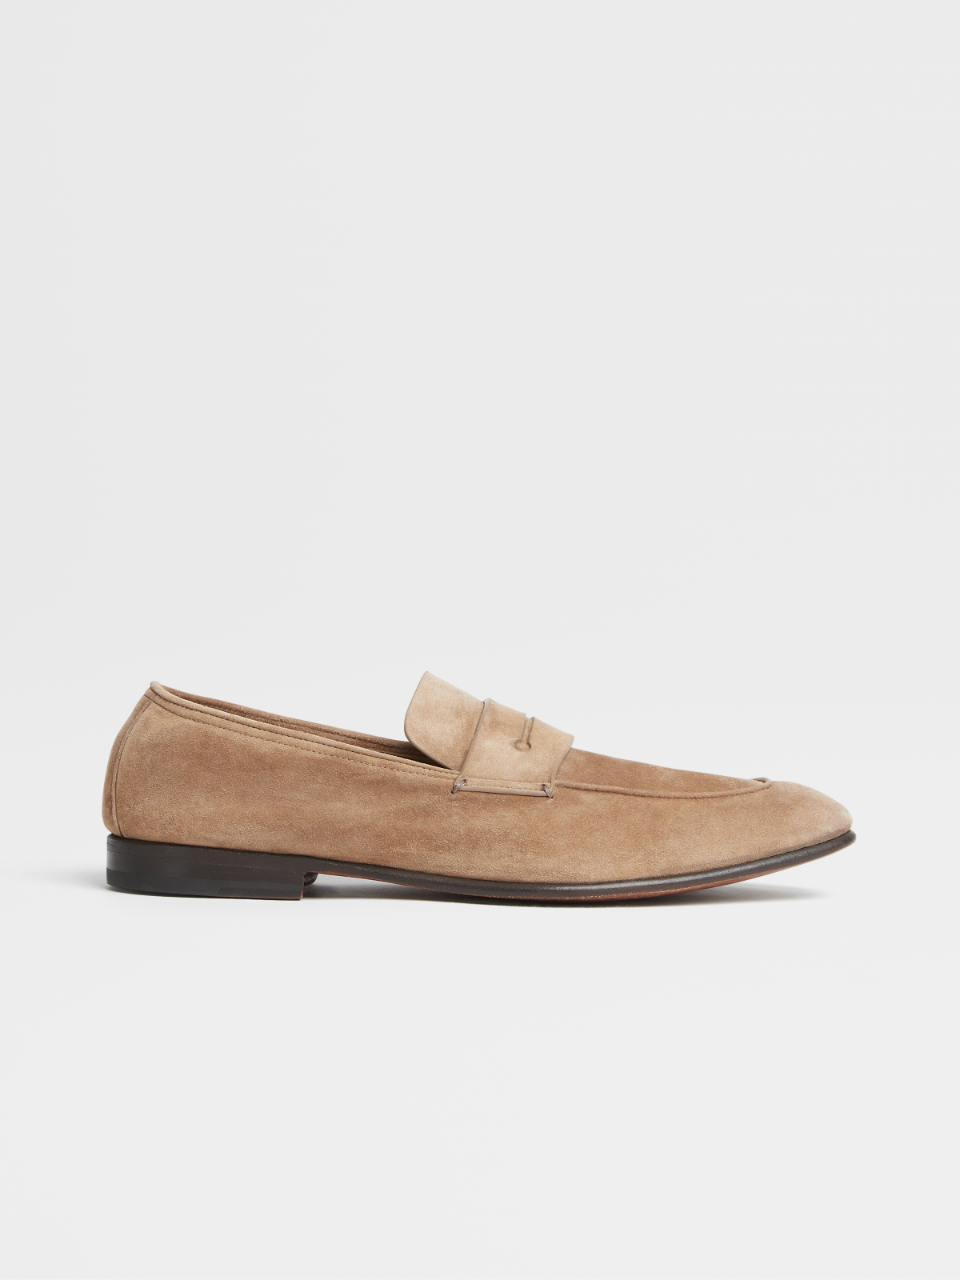 Off-white Suede L'Asola Moccasin